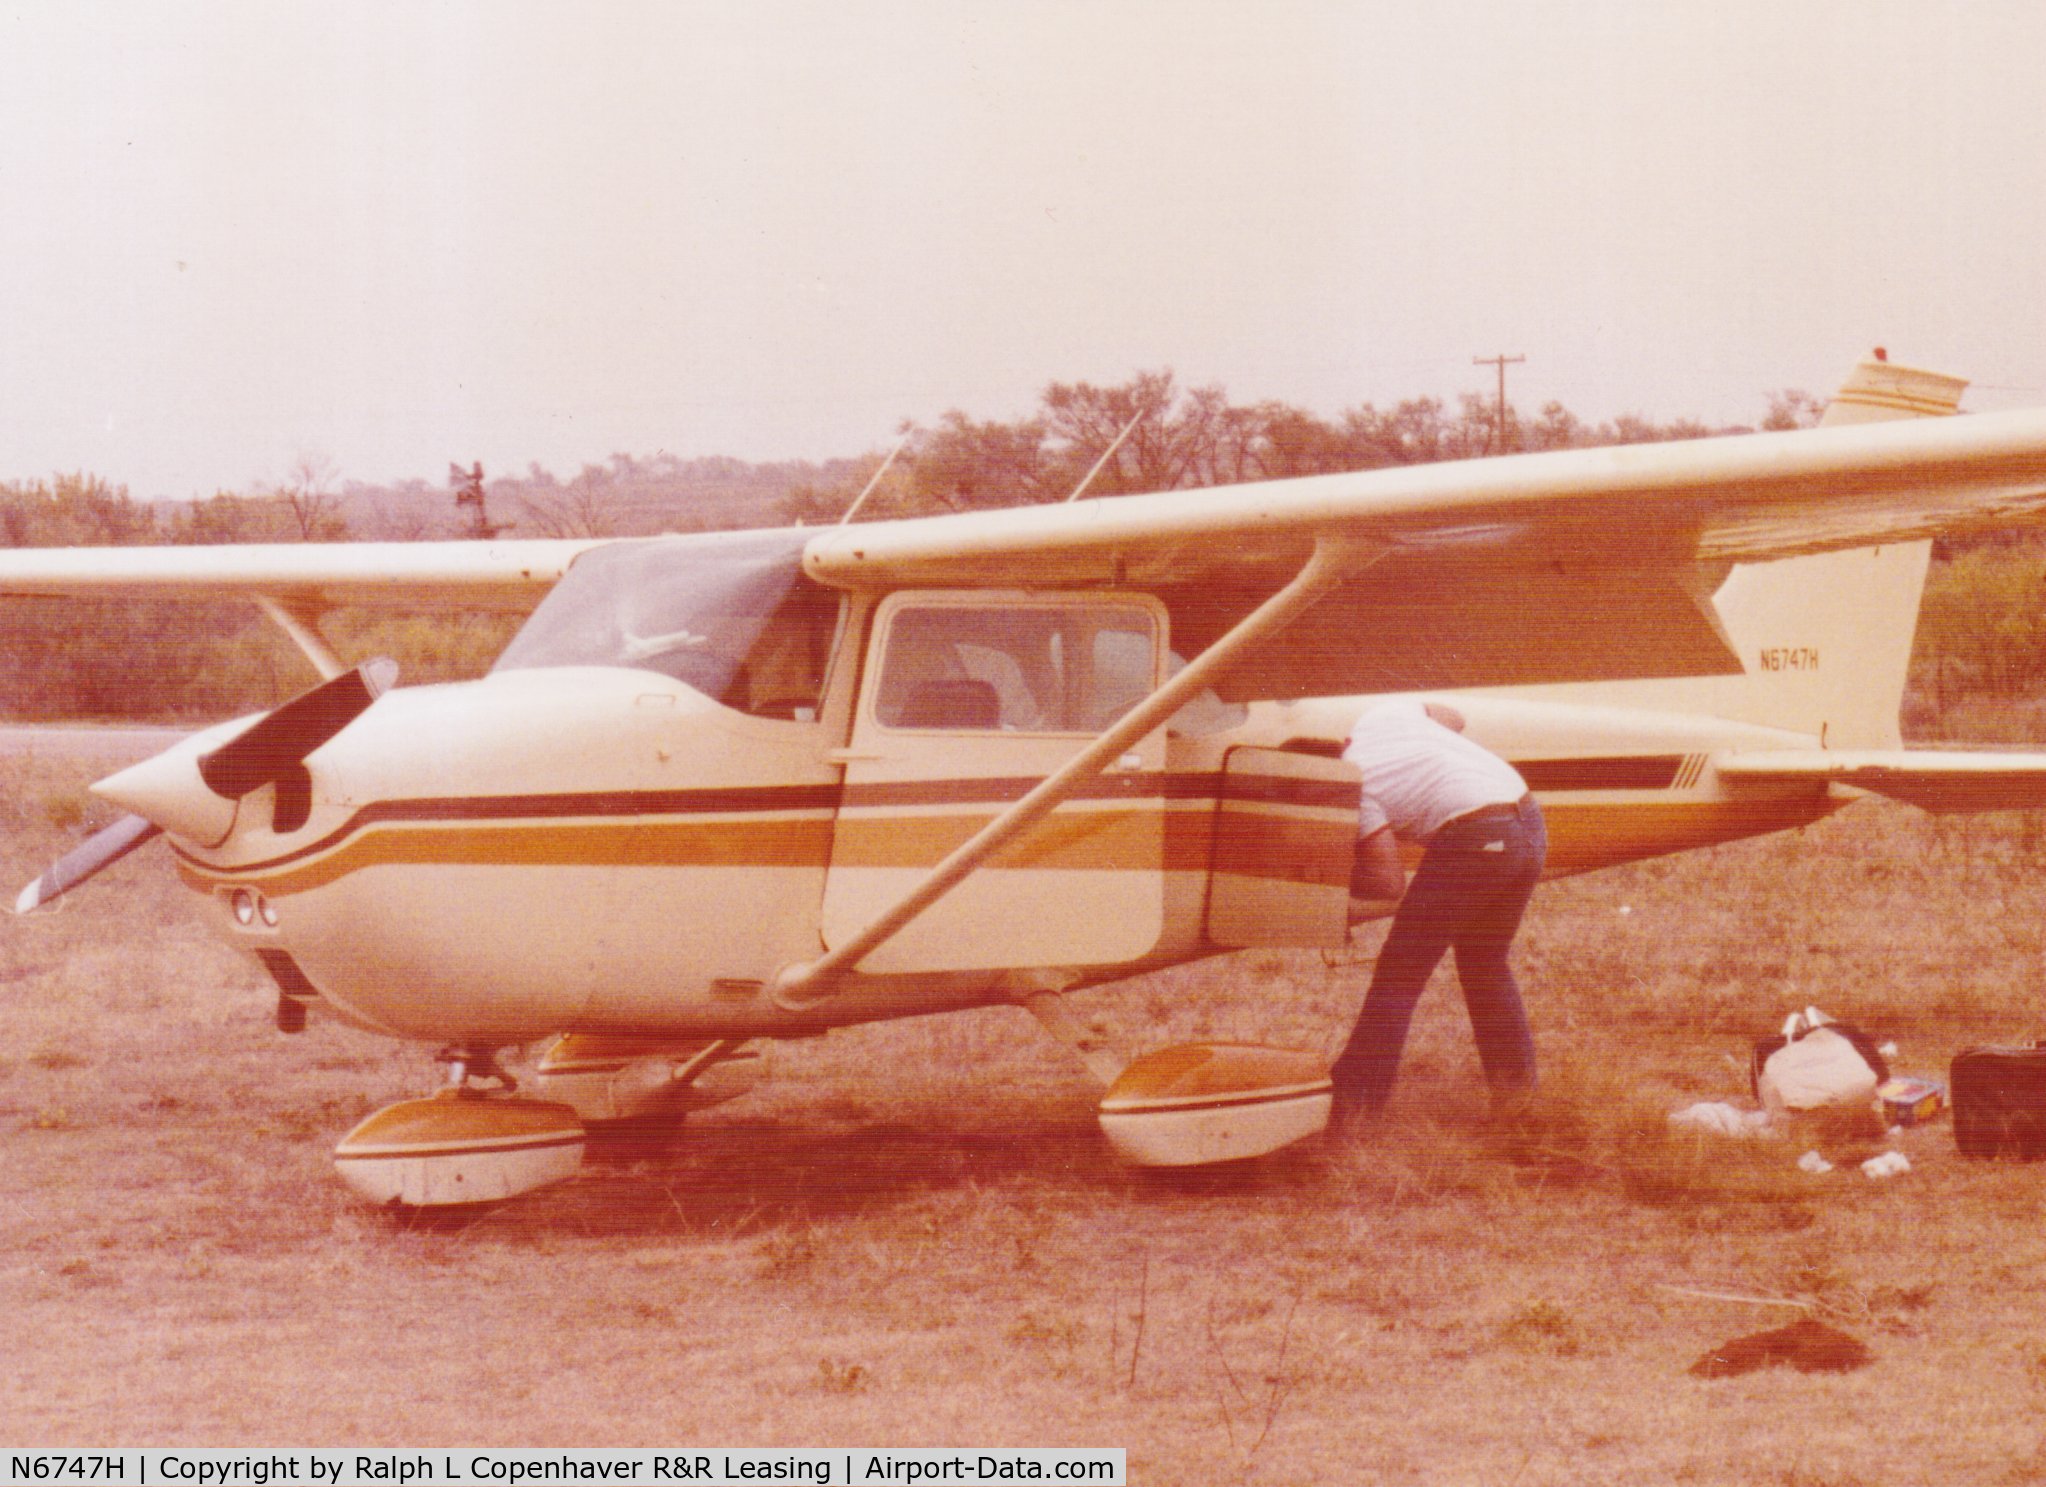 N6747H, 1975 Cessna 172M C/N 17265564, In 1998 I owned an aircraft leasing company in Houston TX. I owned N6747H at that time and this is a picture of  N6747H at a small grass landing field at Venice LA. It was my favorite in our stable.